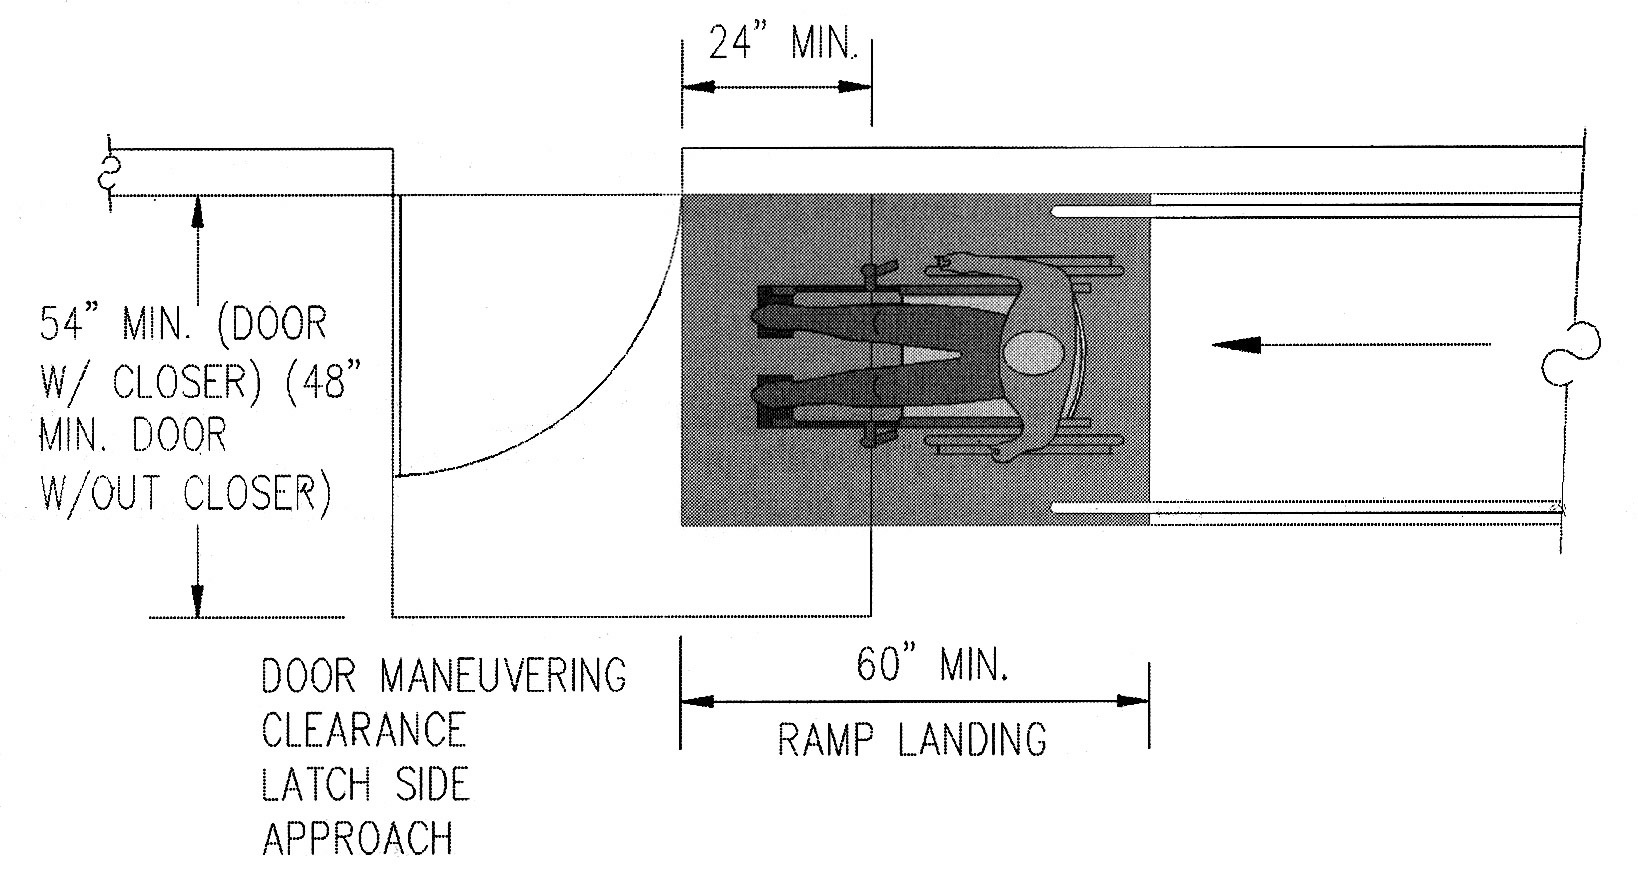 Plan diagram showing the door maneuvering clearance required at the top landing for latch side approach at a single door